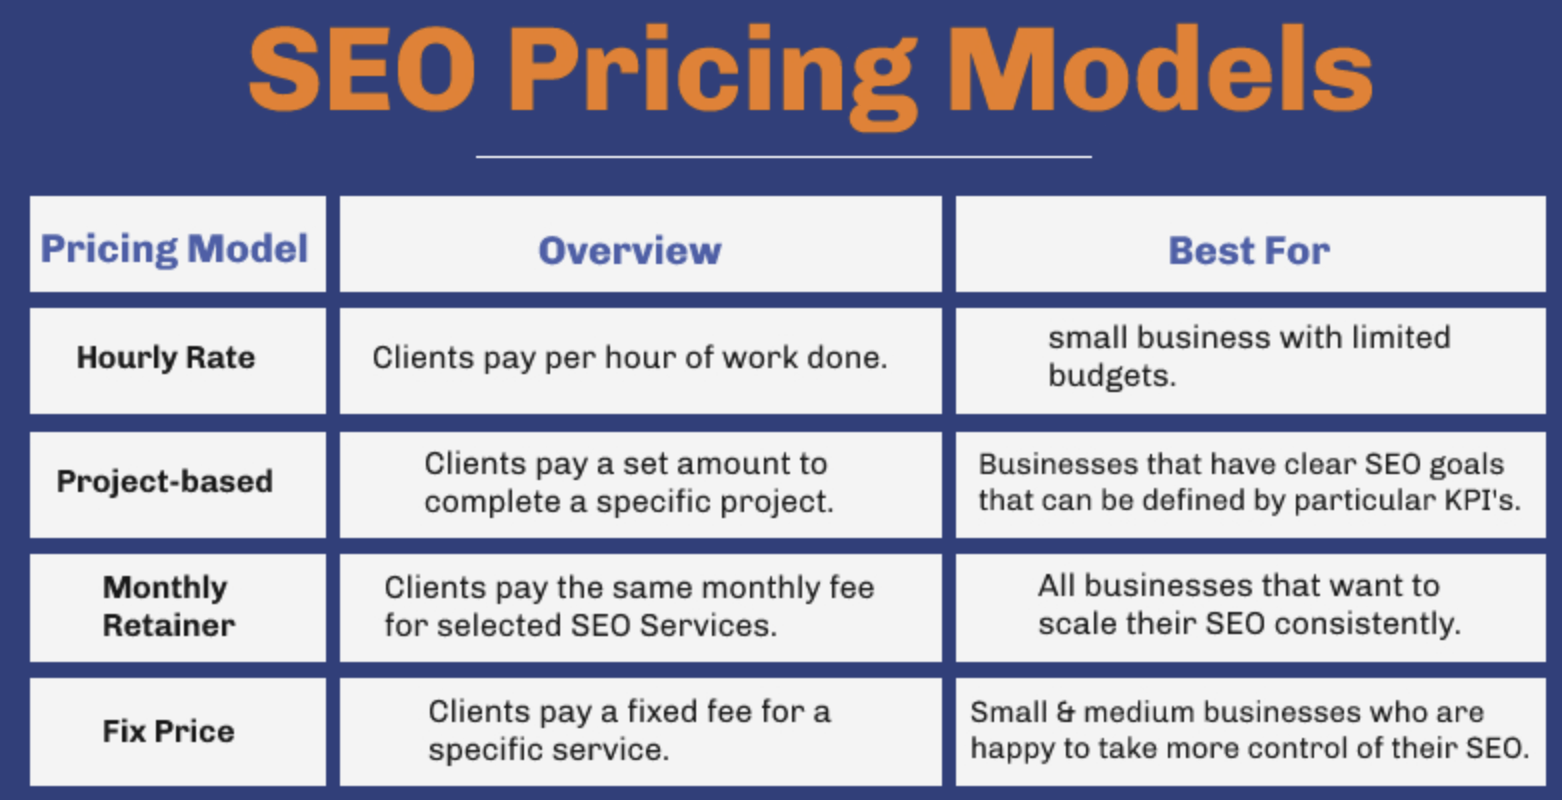 Table of SEO pricing models. 